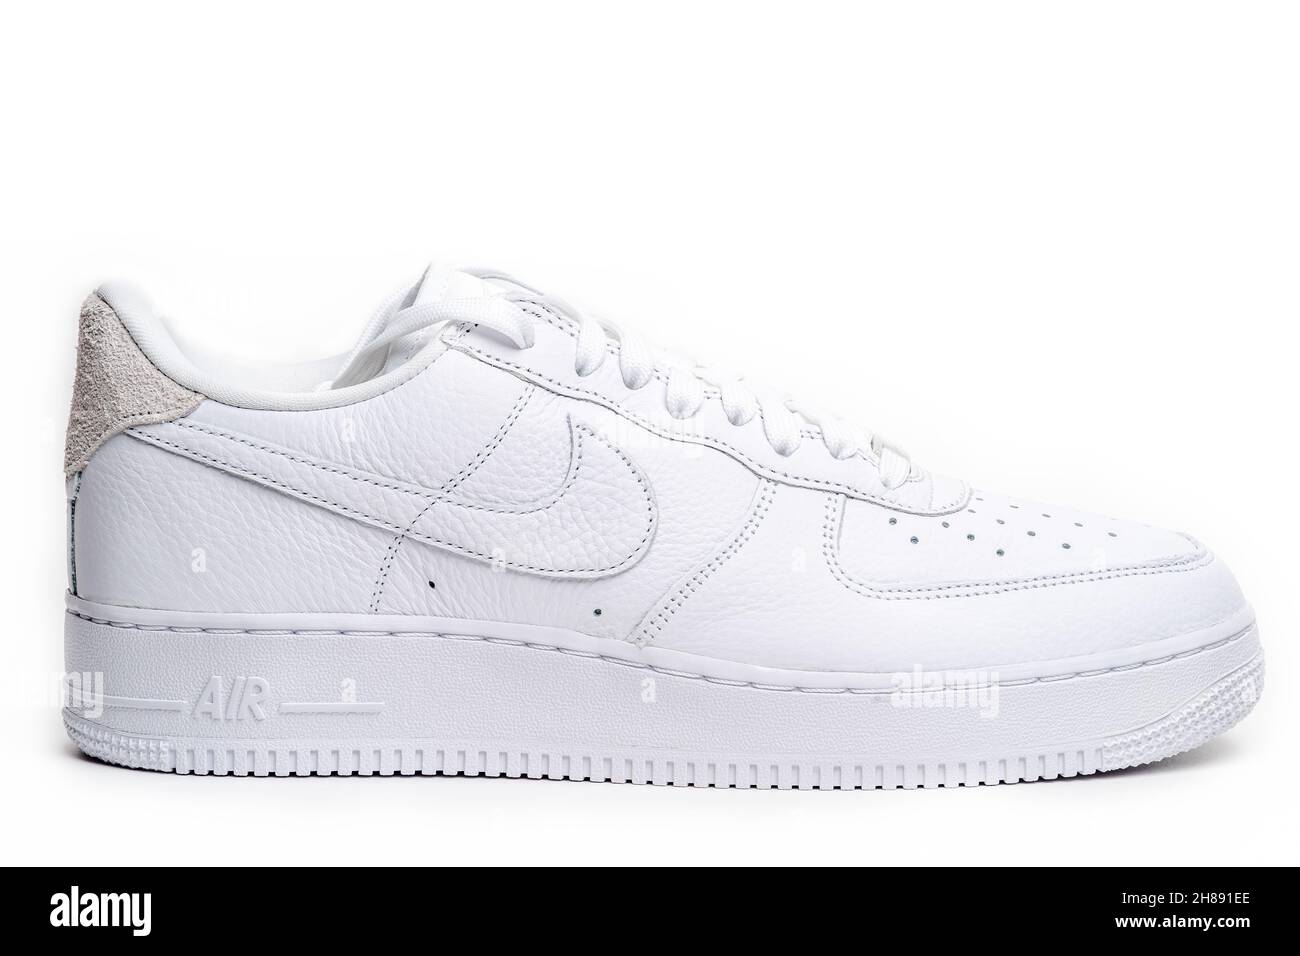 what brand are air force ones